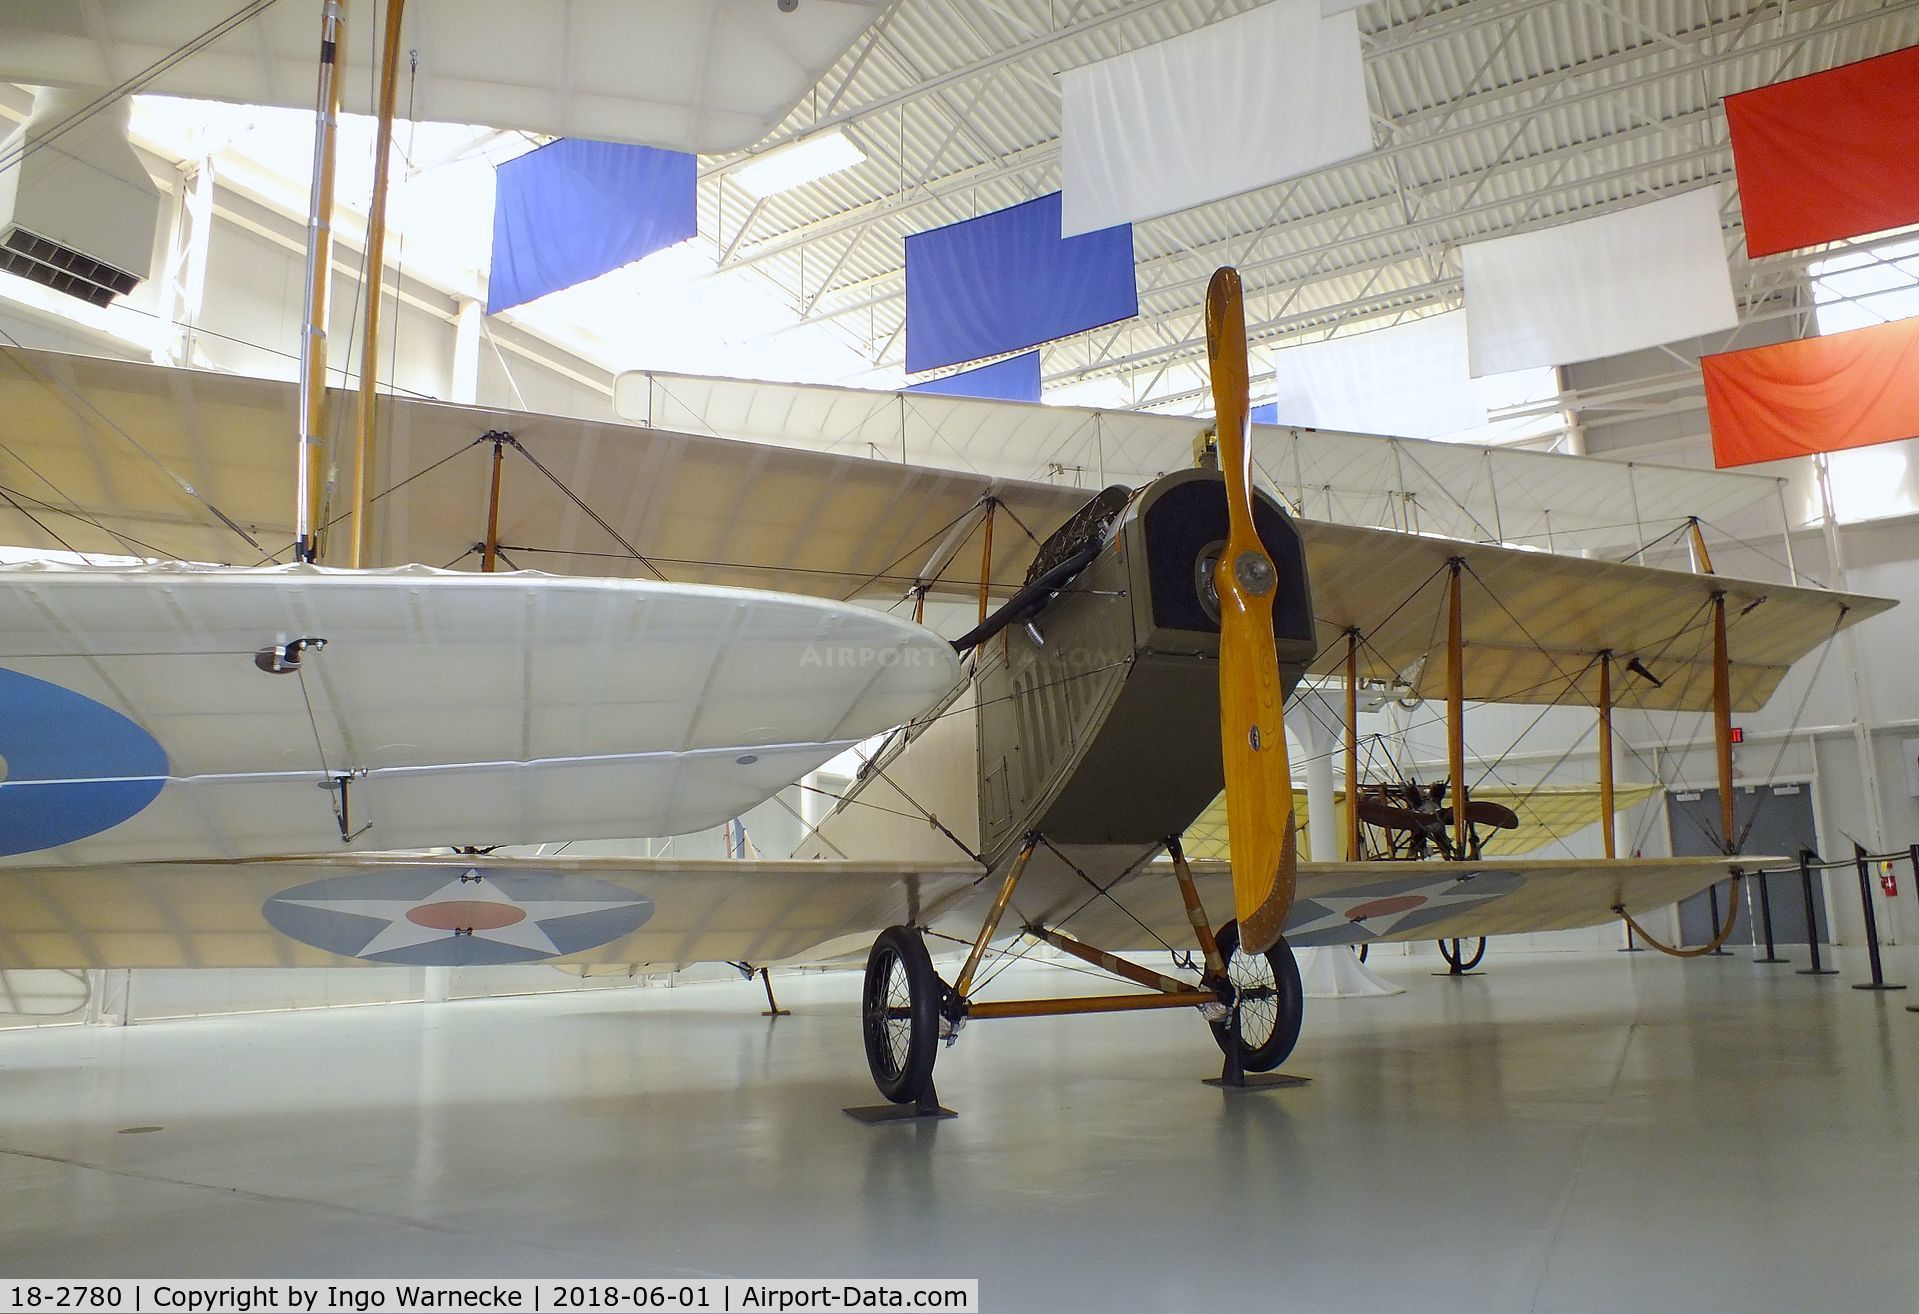 18-2780, 1918 Curtiss JN-4D Jenny C/N 278, Curtiss JN-4D at the US Army Aviation Museum, Ft. Rucker